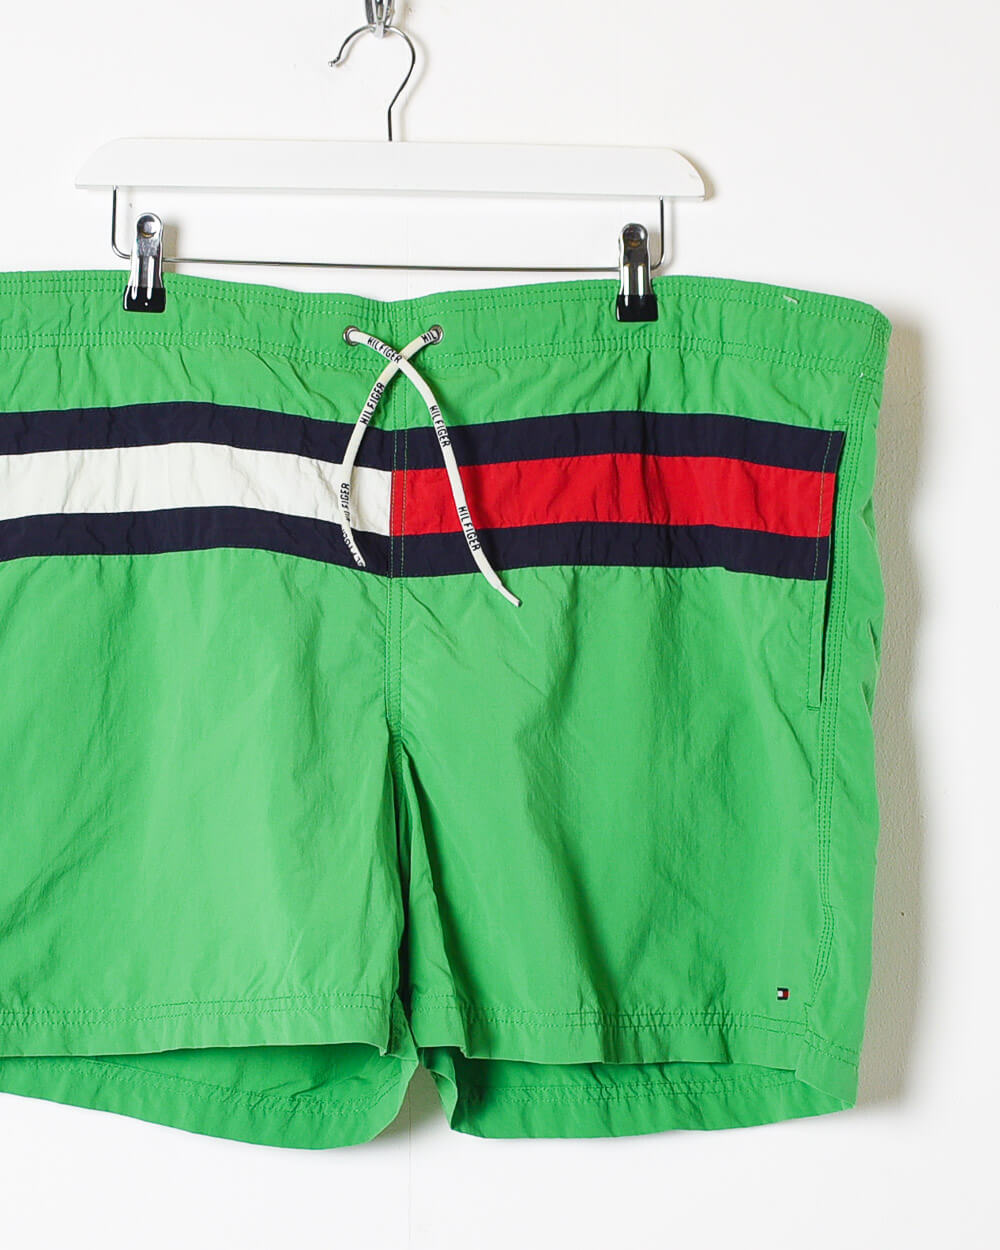 Green Tommy Hilfiger Shorts - X-Large